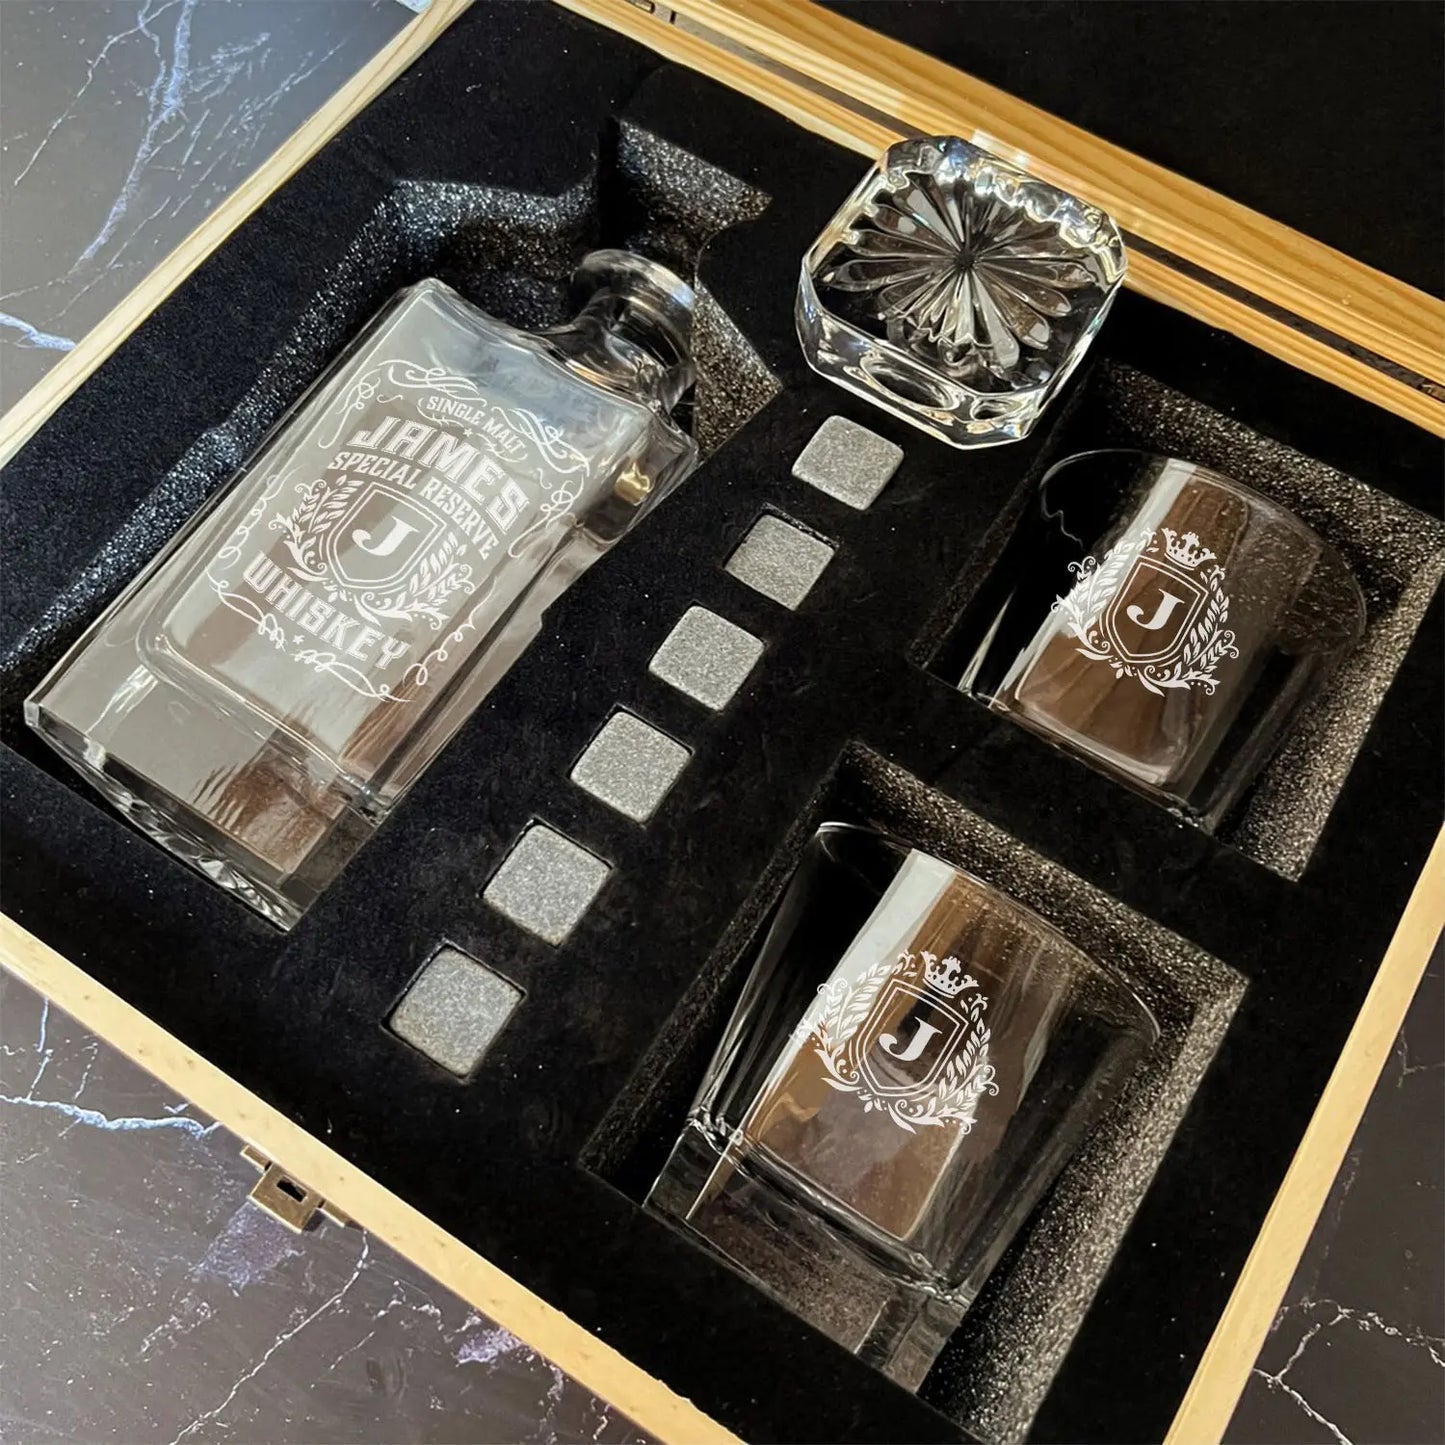 JAMES A01 Personalized Decanter Set wooden box and Ice 9